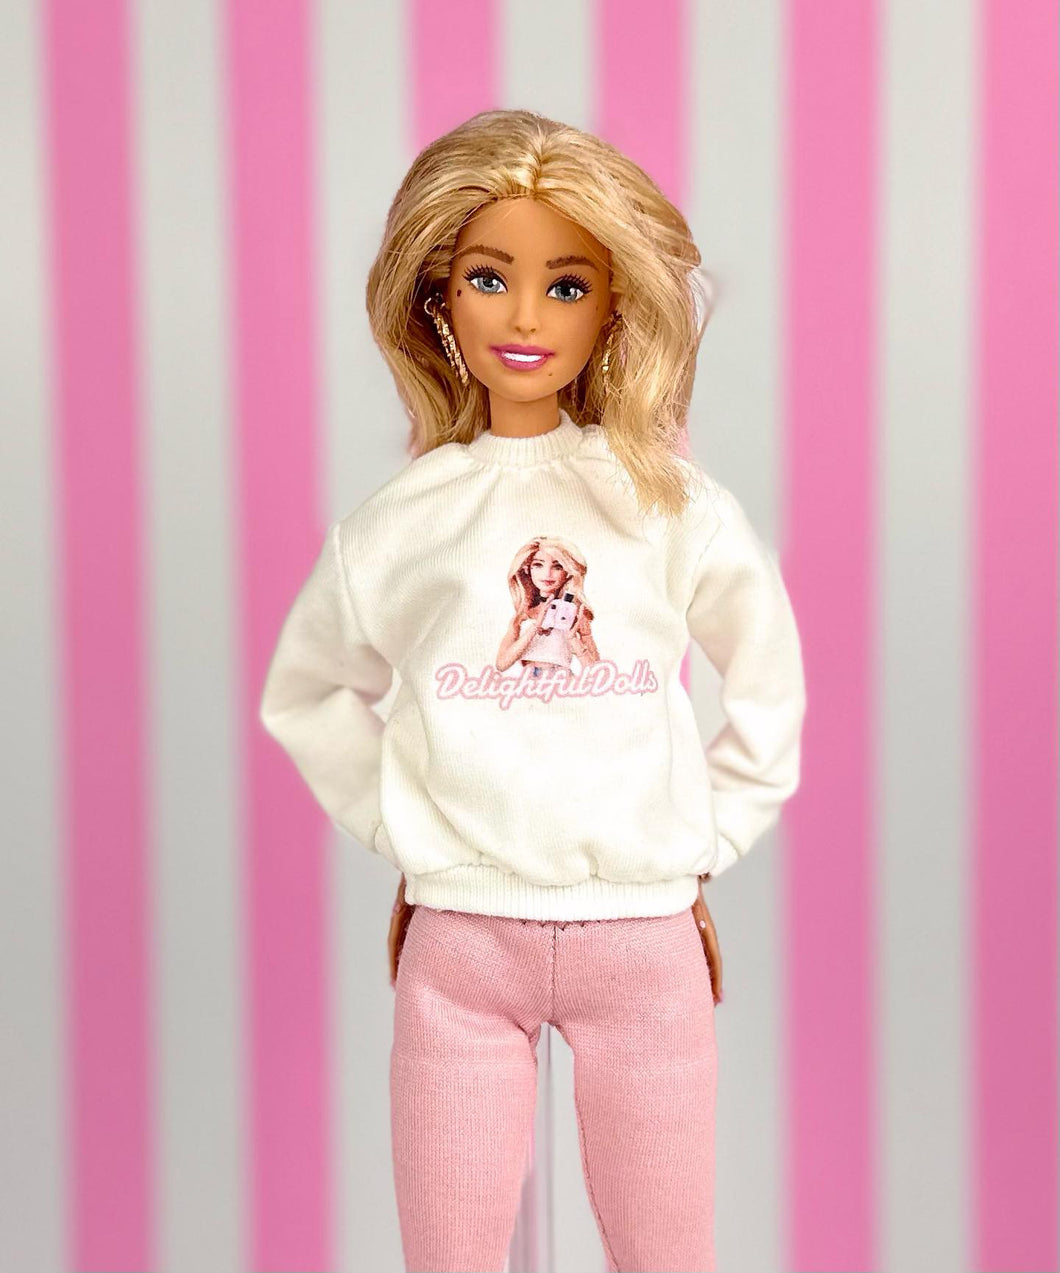 Delightful Dolls Sweatshirt , #ddsquad and The doll Tailor Sweaters for Barbie dolls